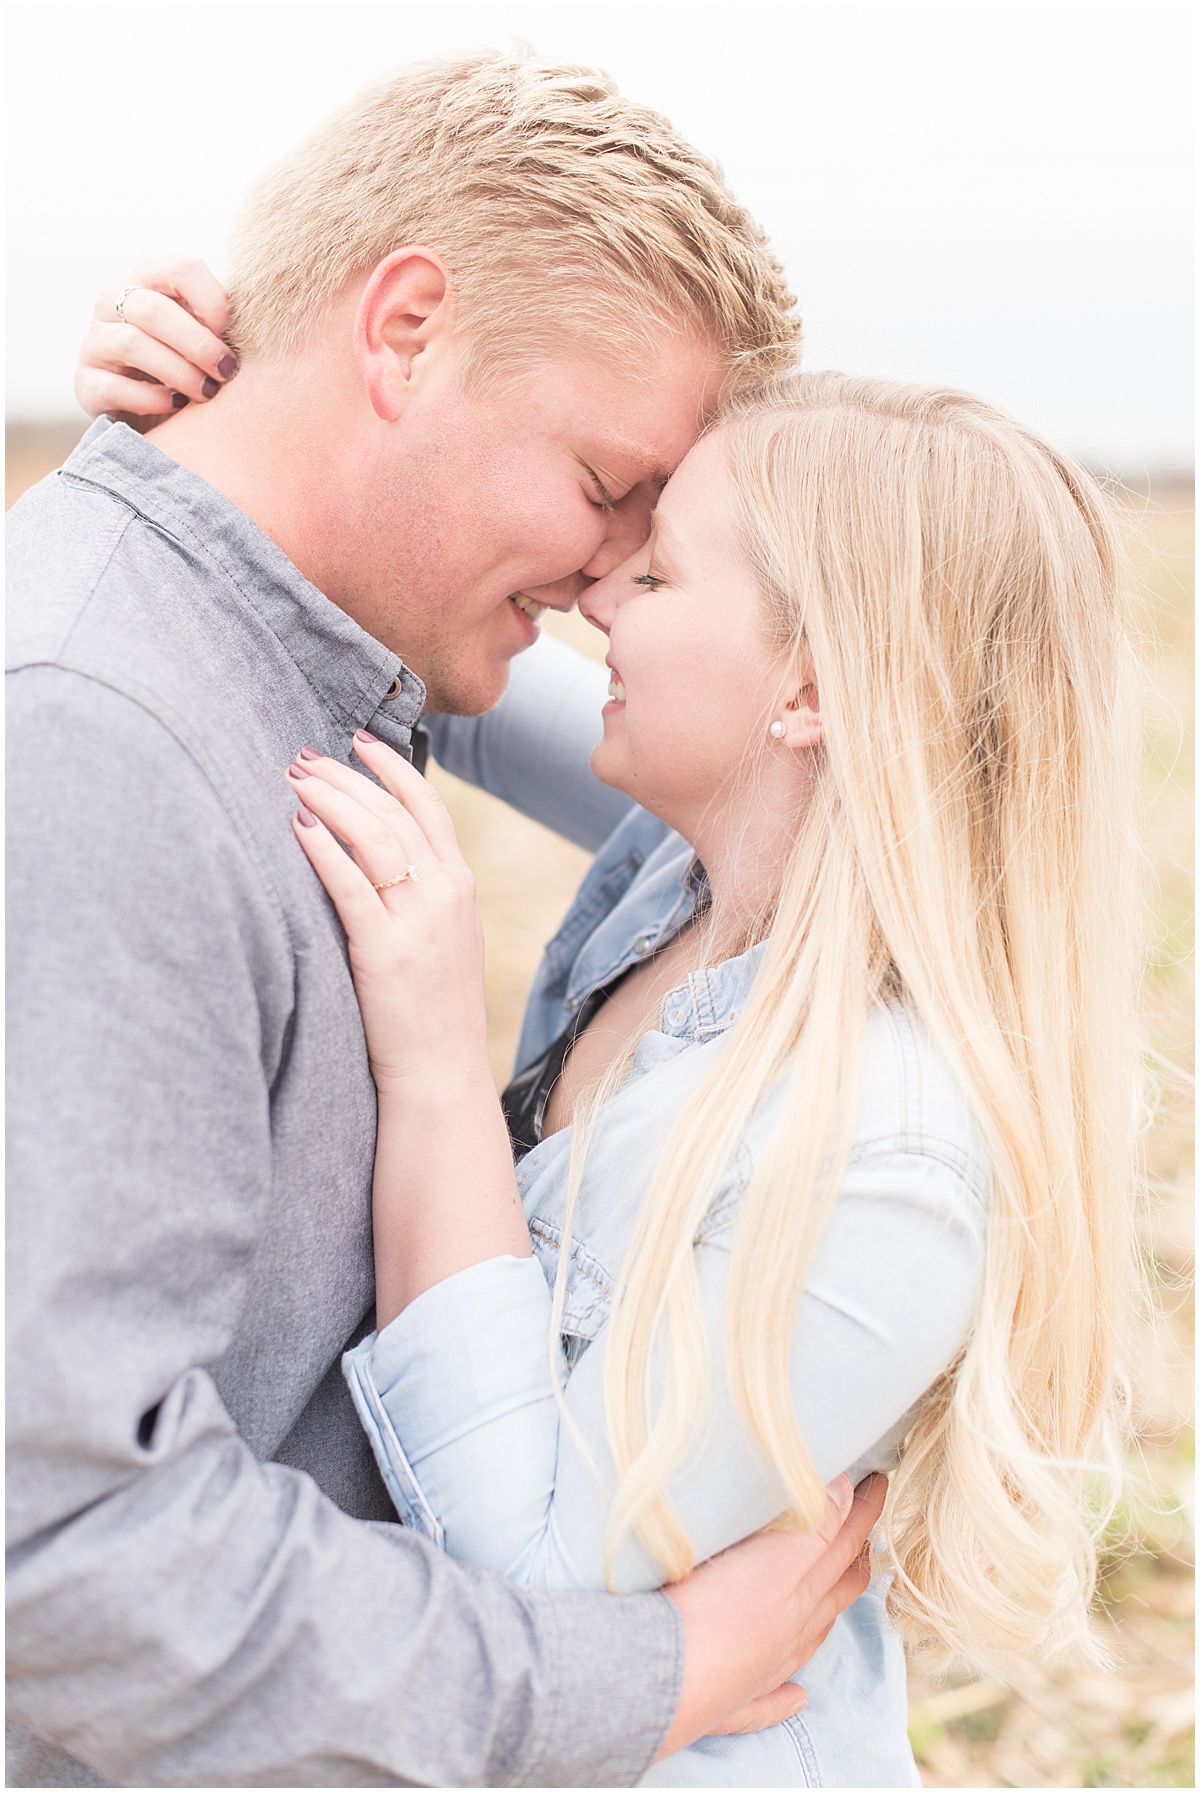 Tyler Van Wanzeele and Baileigh Fleming engagement photos at Wea Creek Orchard in Lafayette Indiana1.jpg